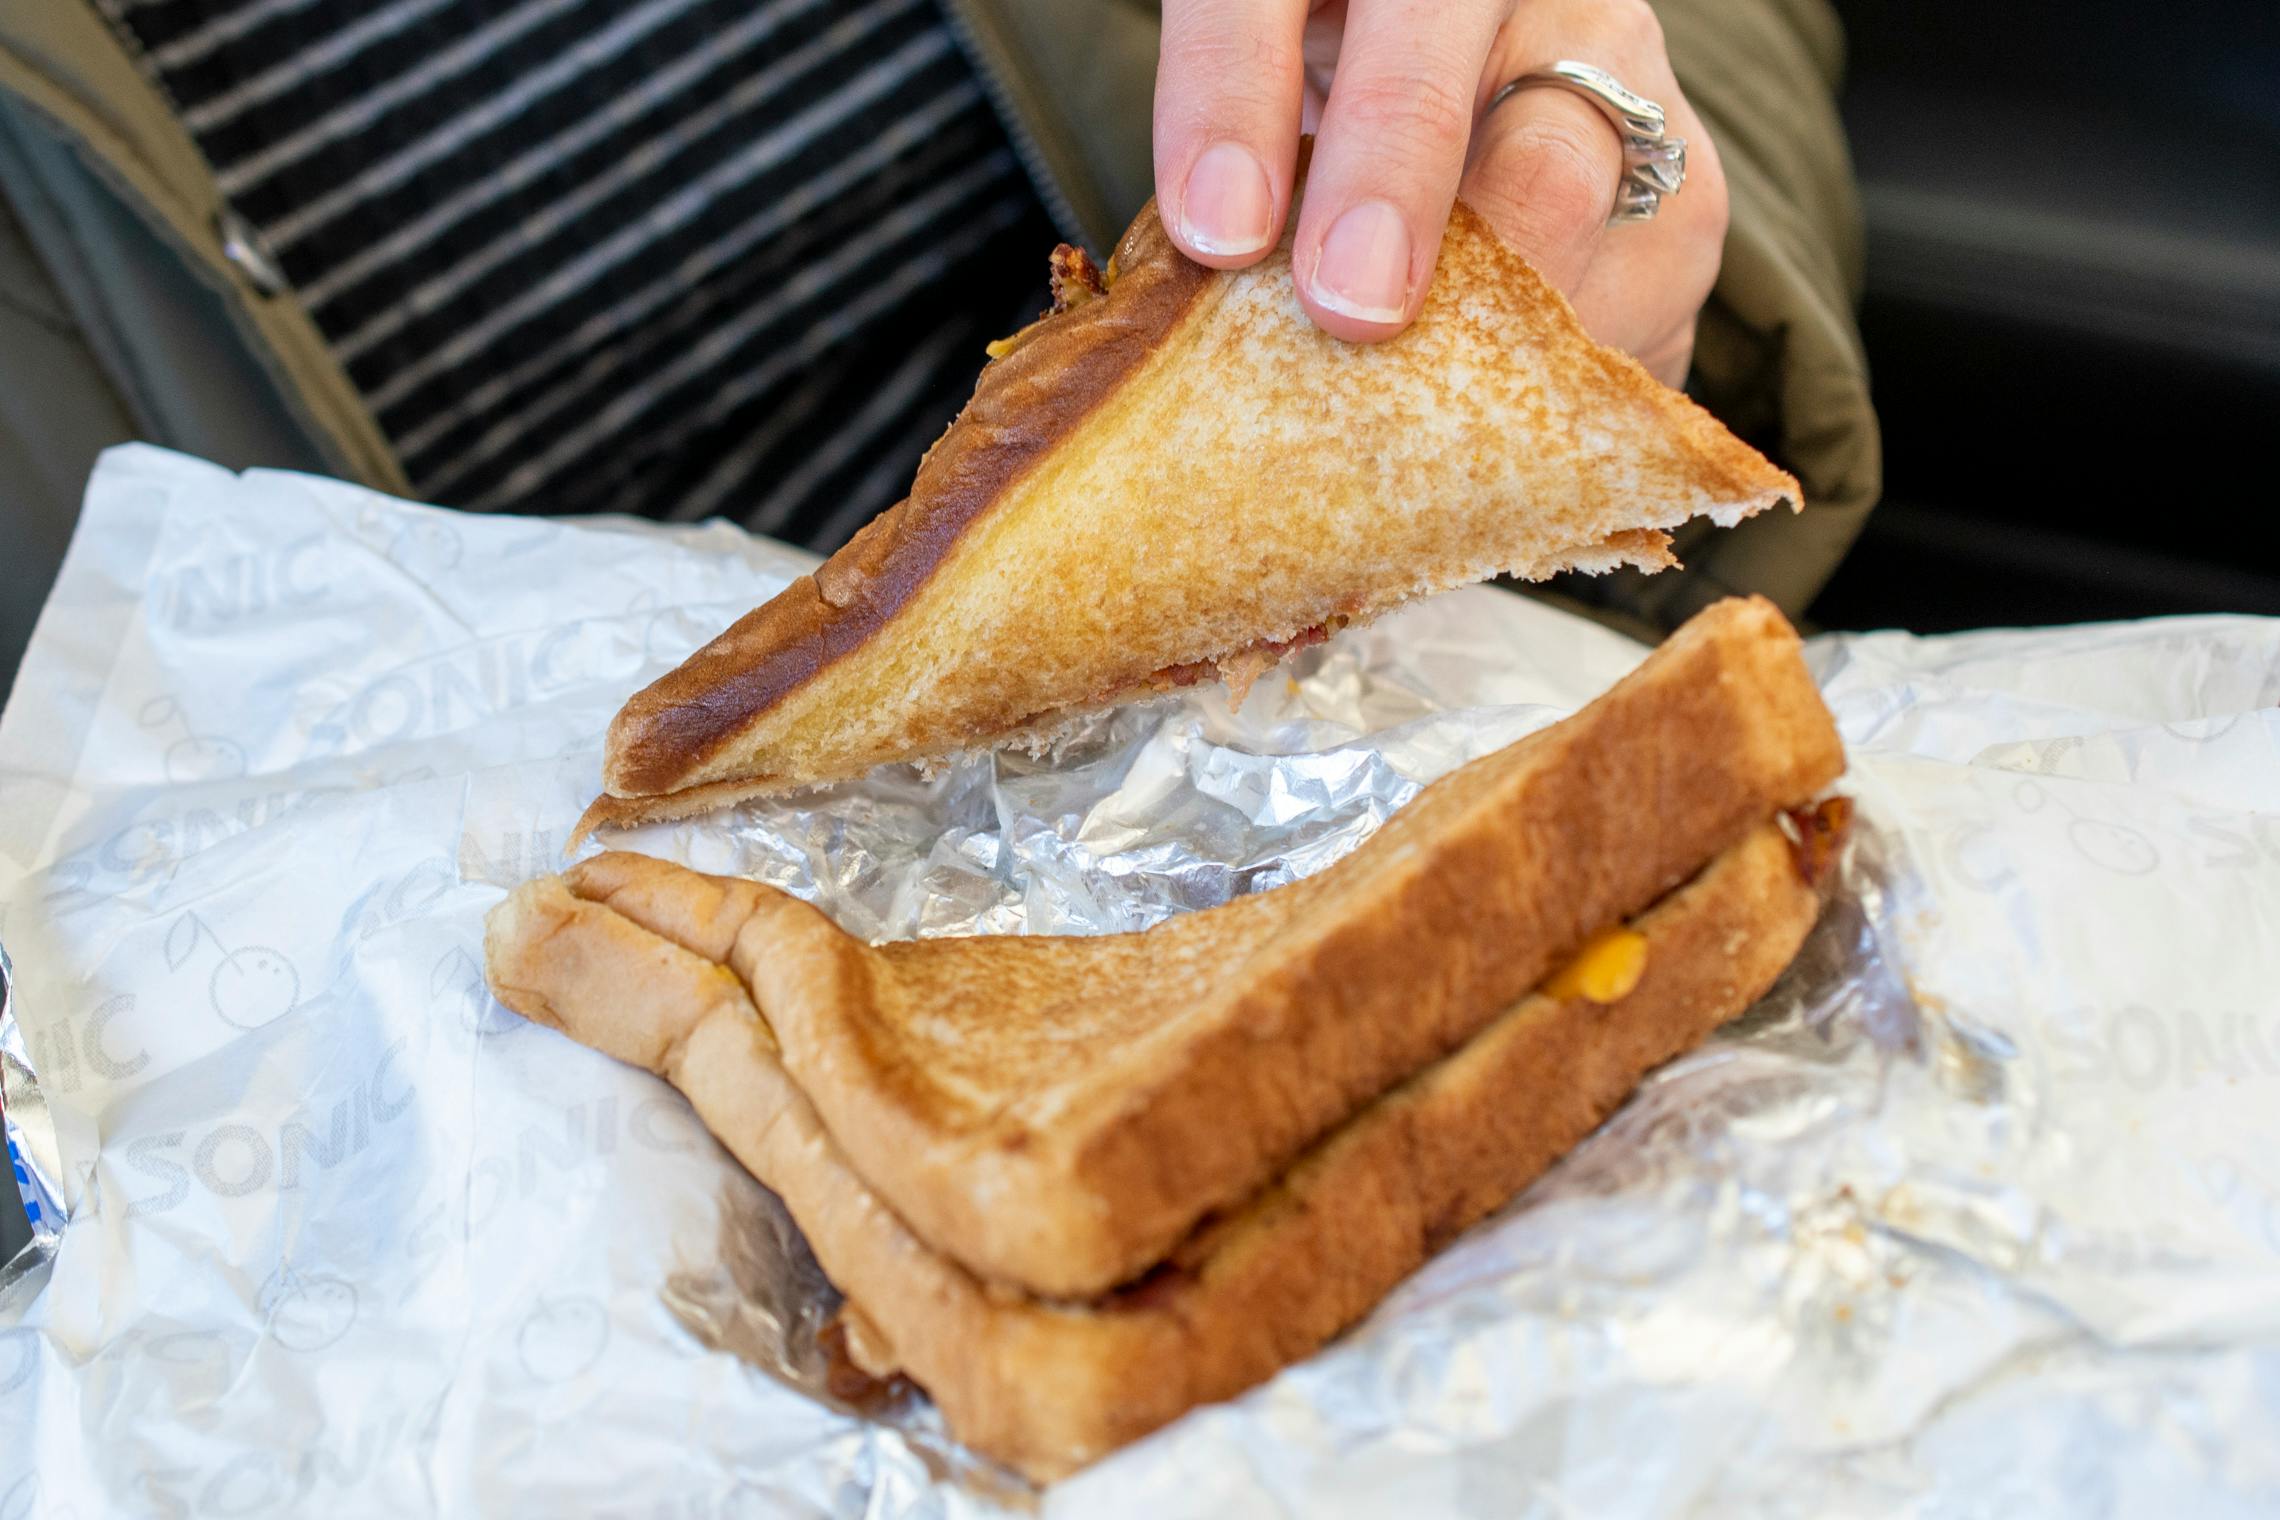 A close up of a Sonic grilled cheese sandwich